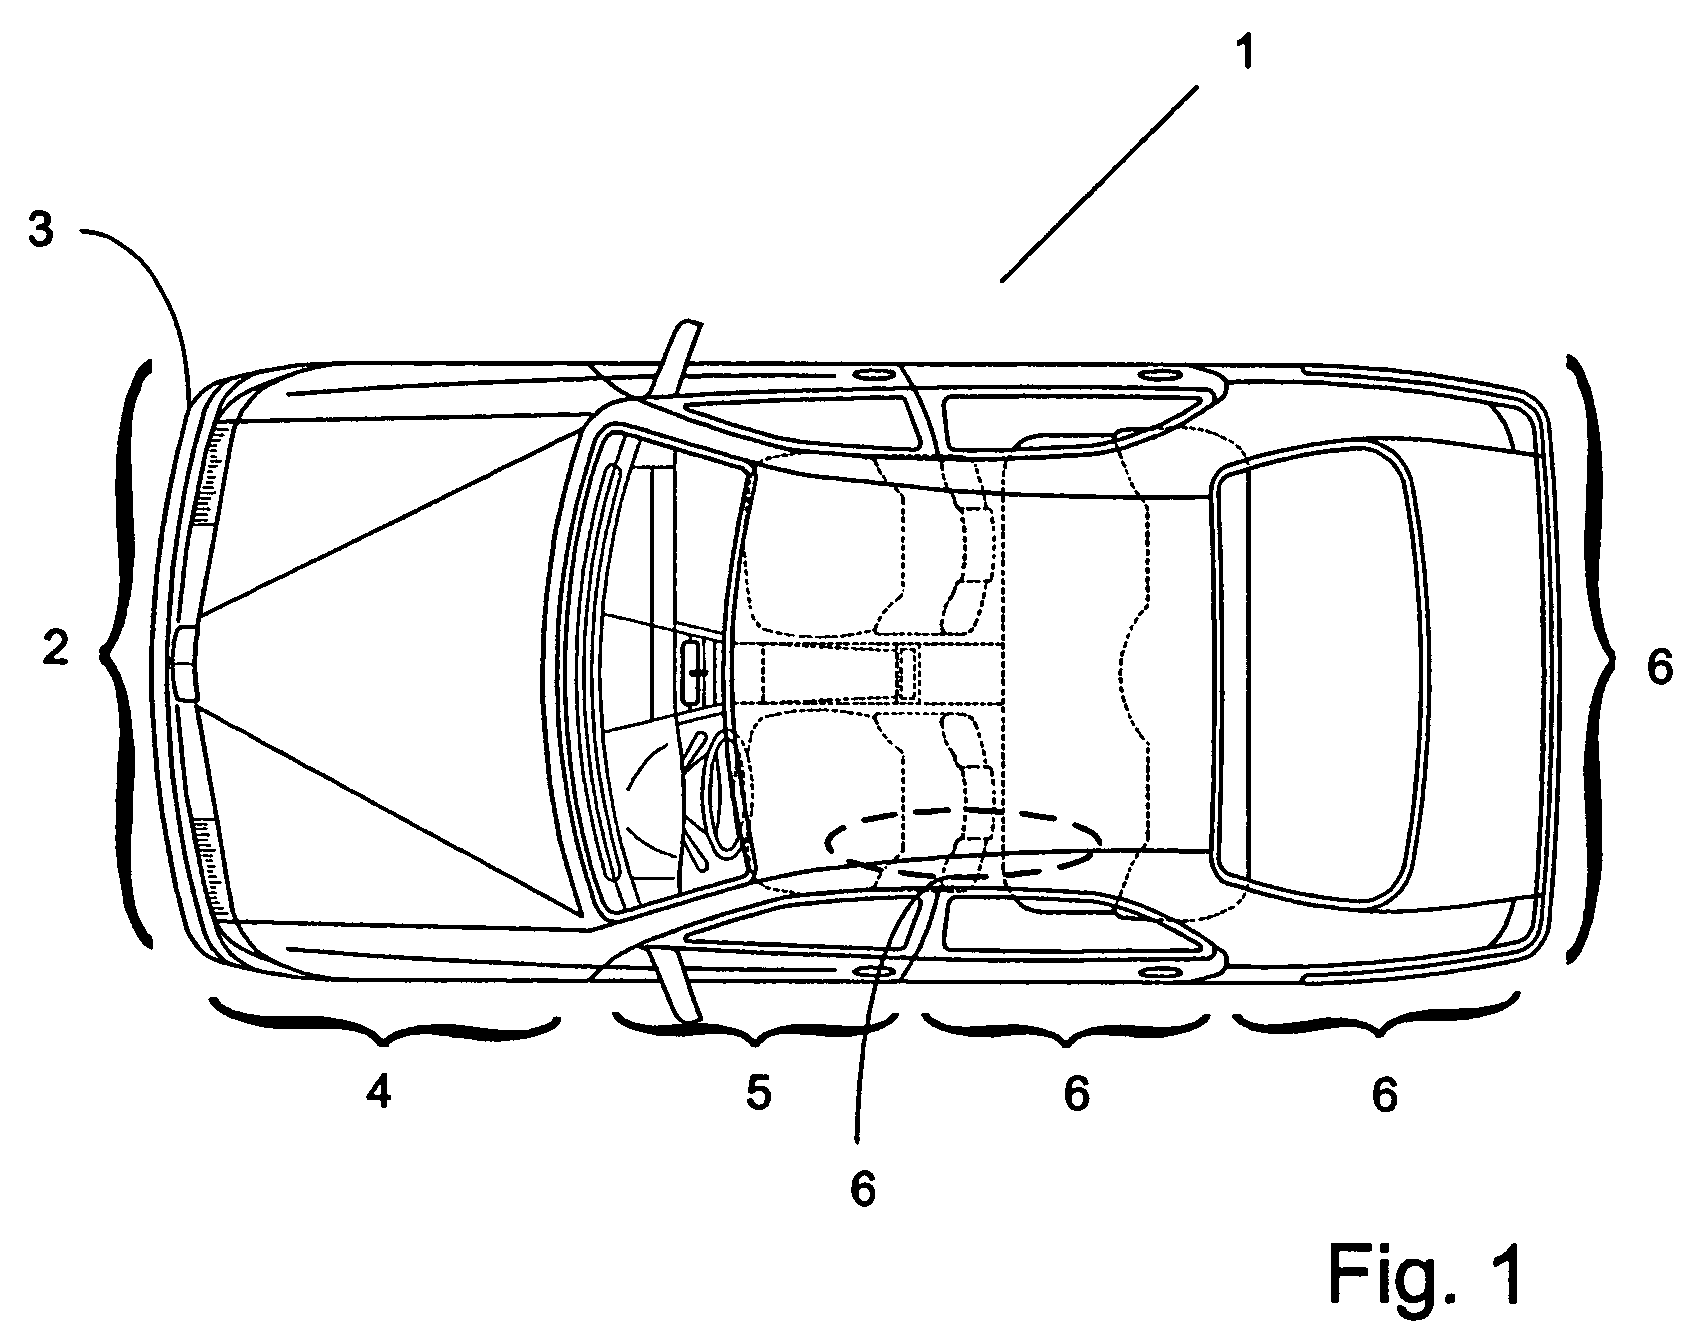 Method for controlling a safety system in a vehicle